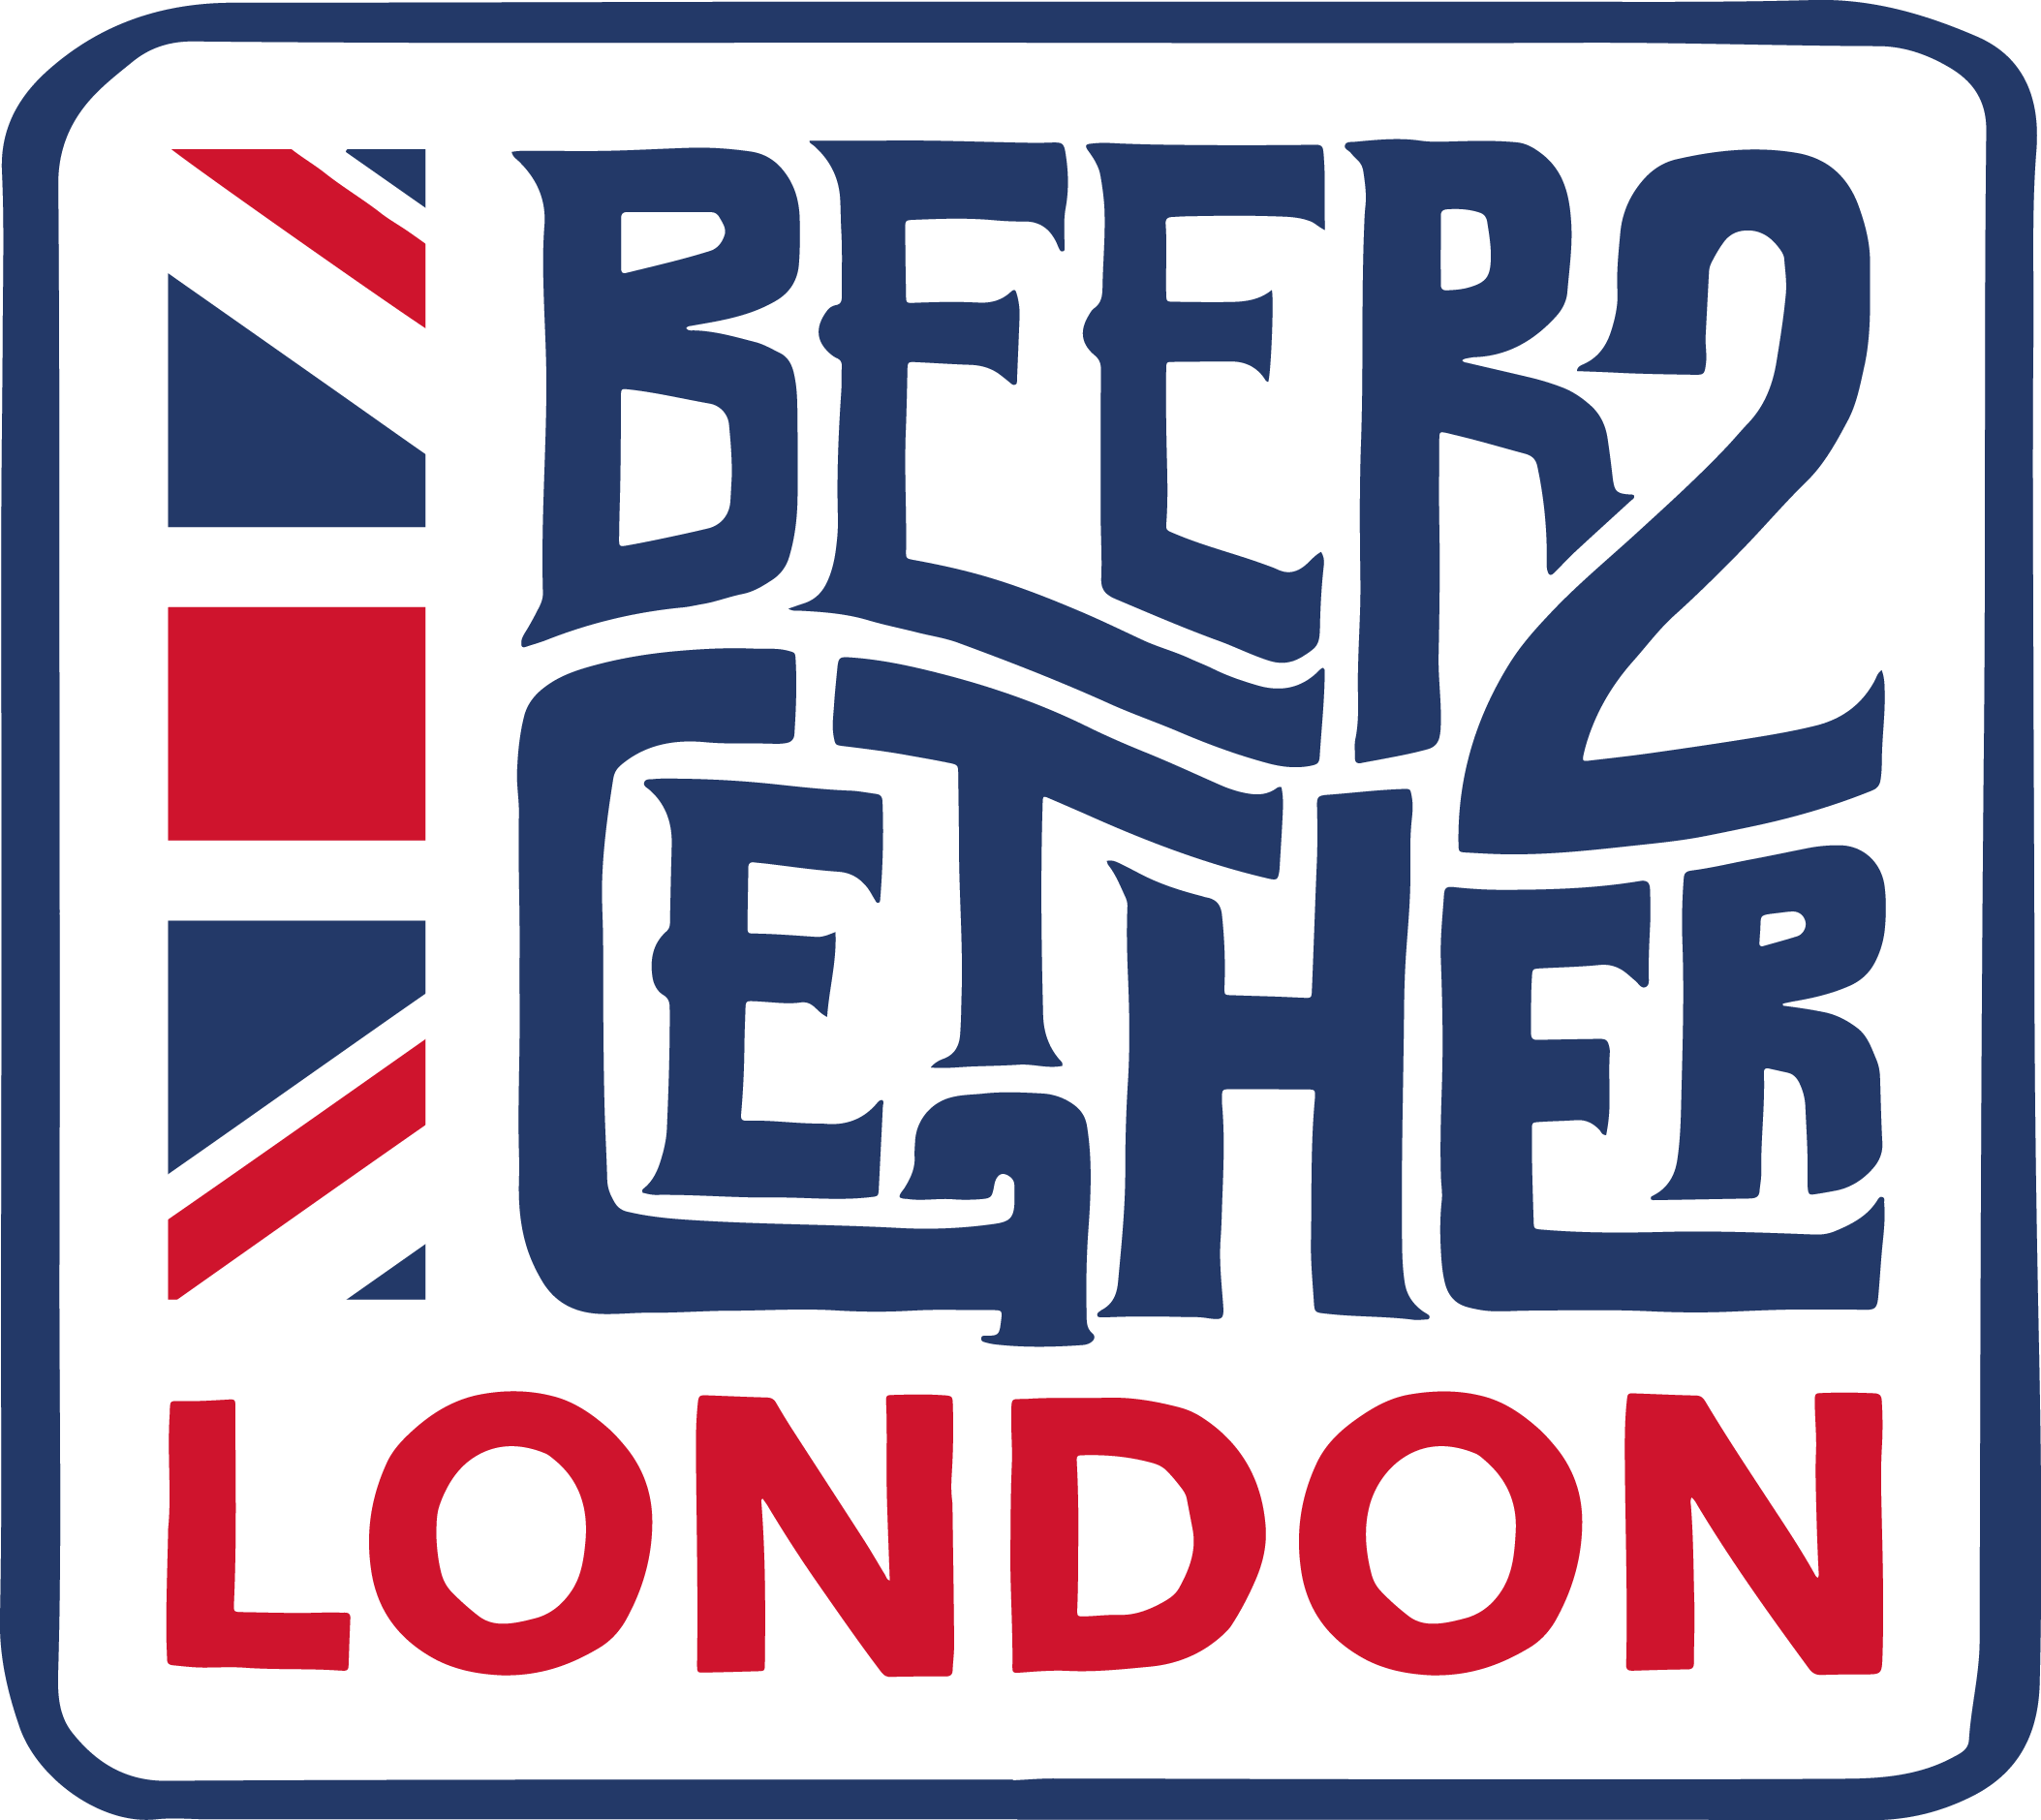 Join us for Beer2Gether London!